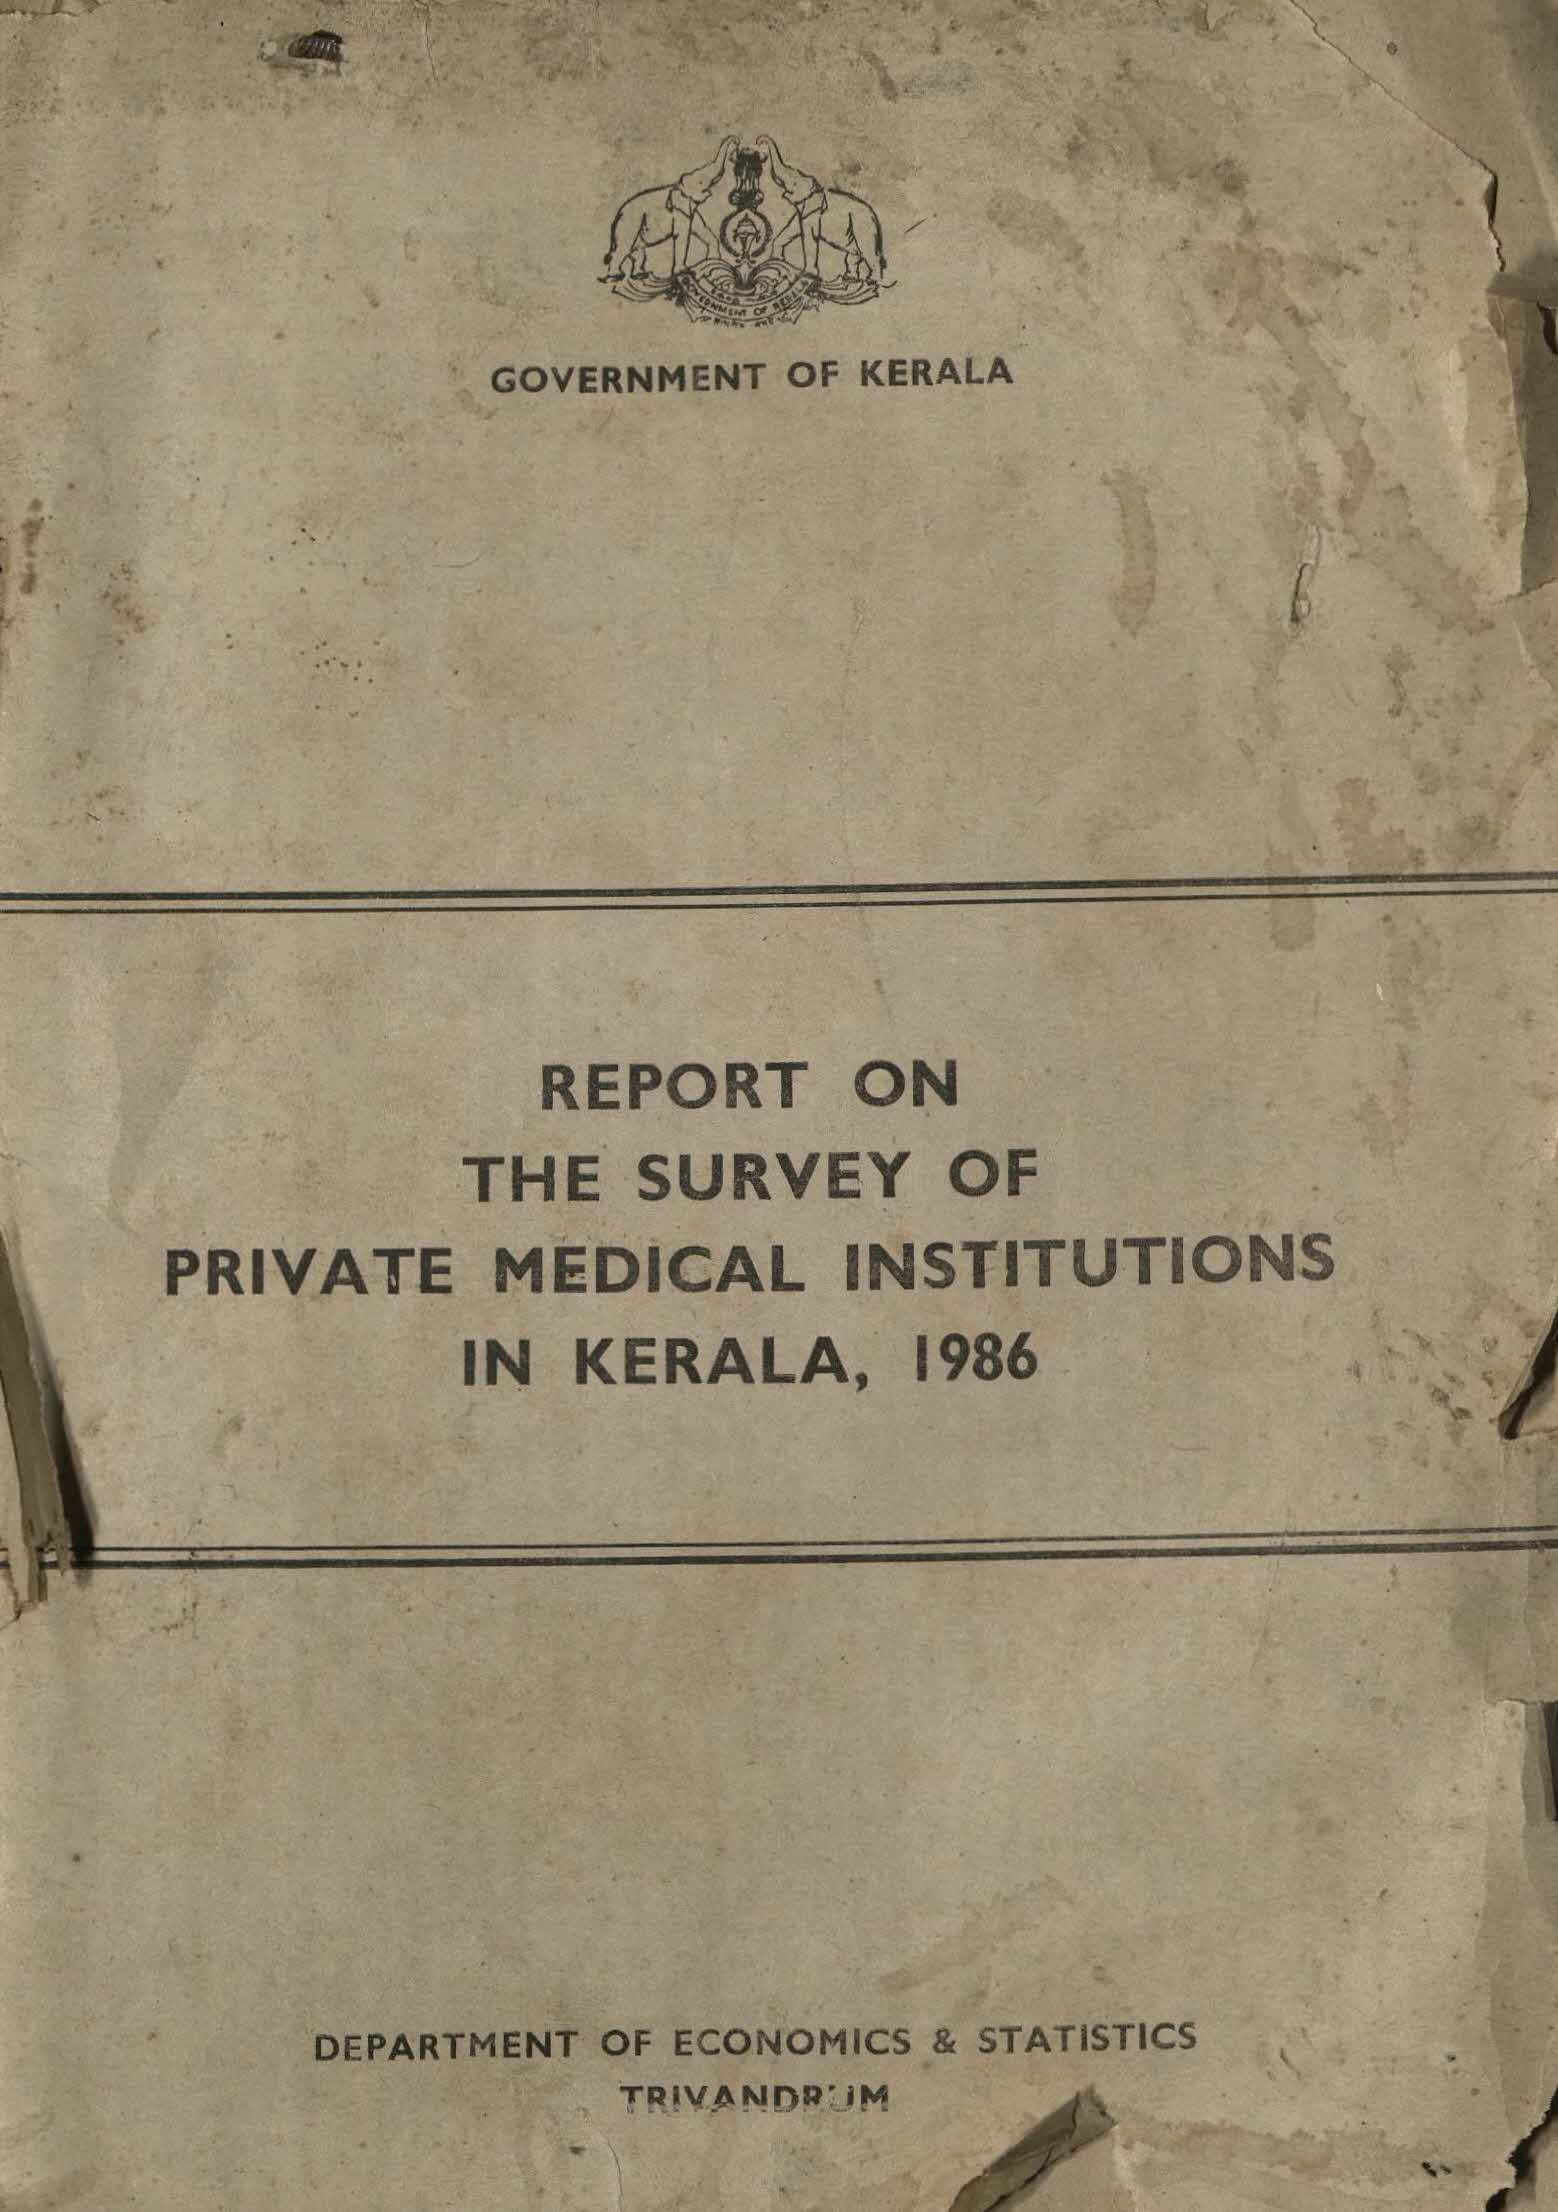 REPORT ON THE SURVEY OF PRIVATE MEDICAL INSTITUTIONS IN KERALA 1986